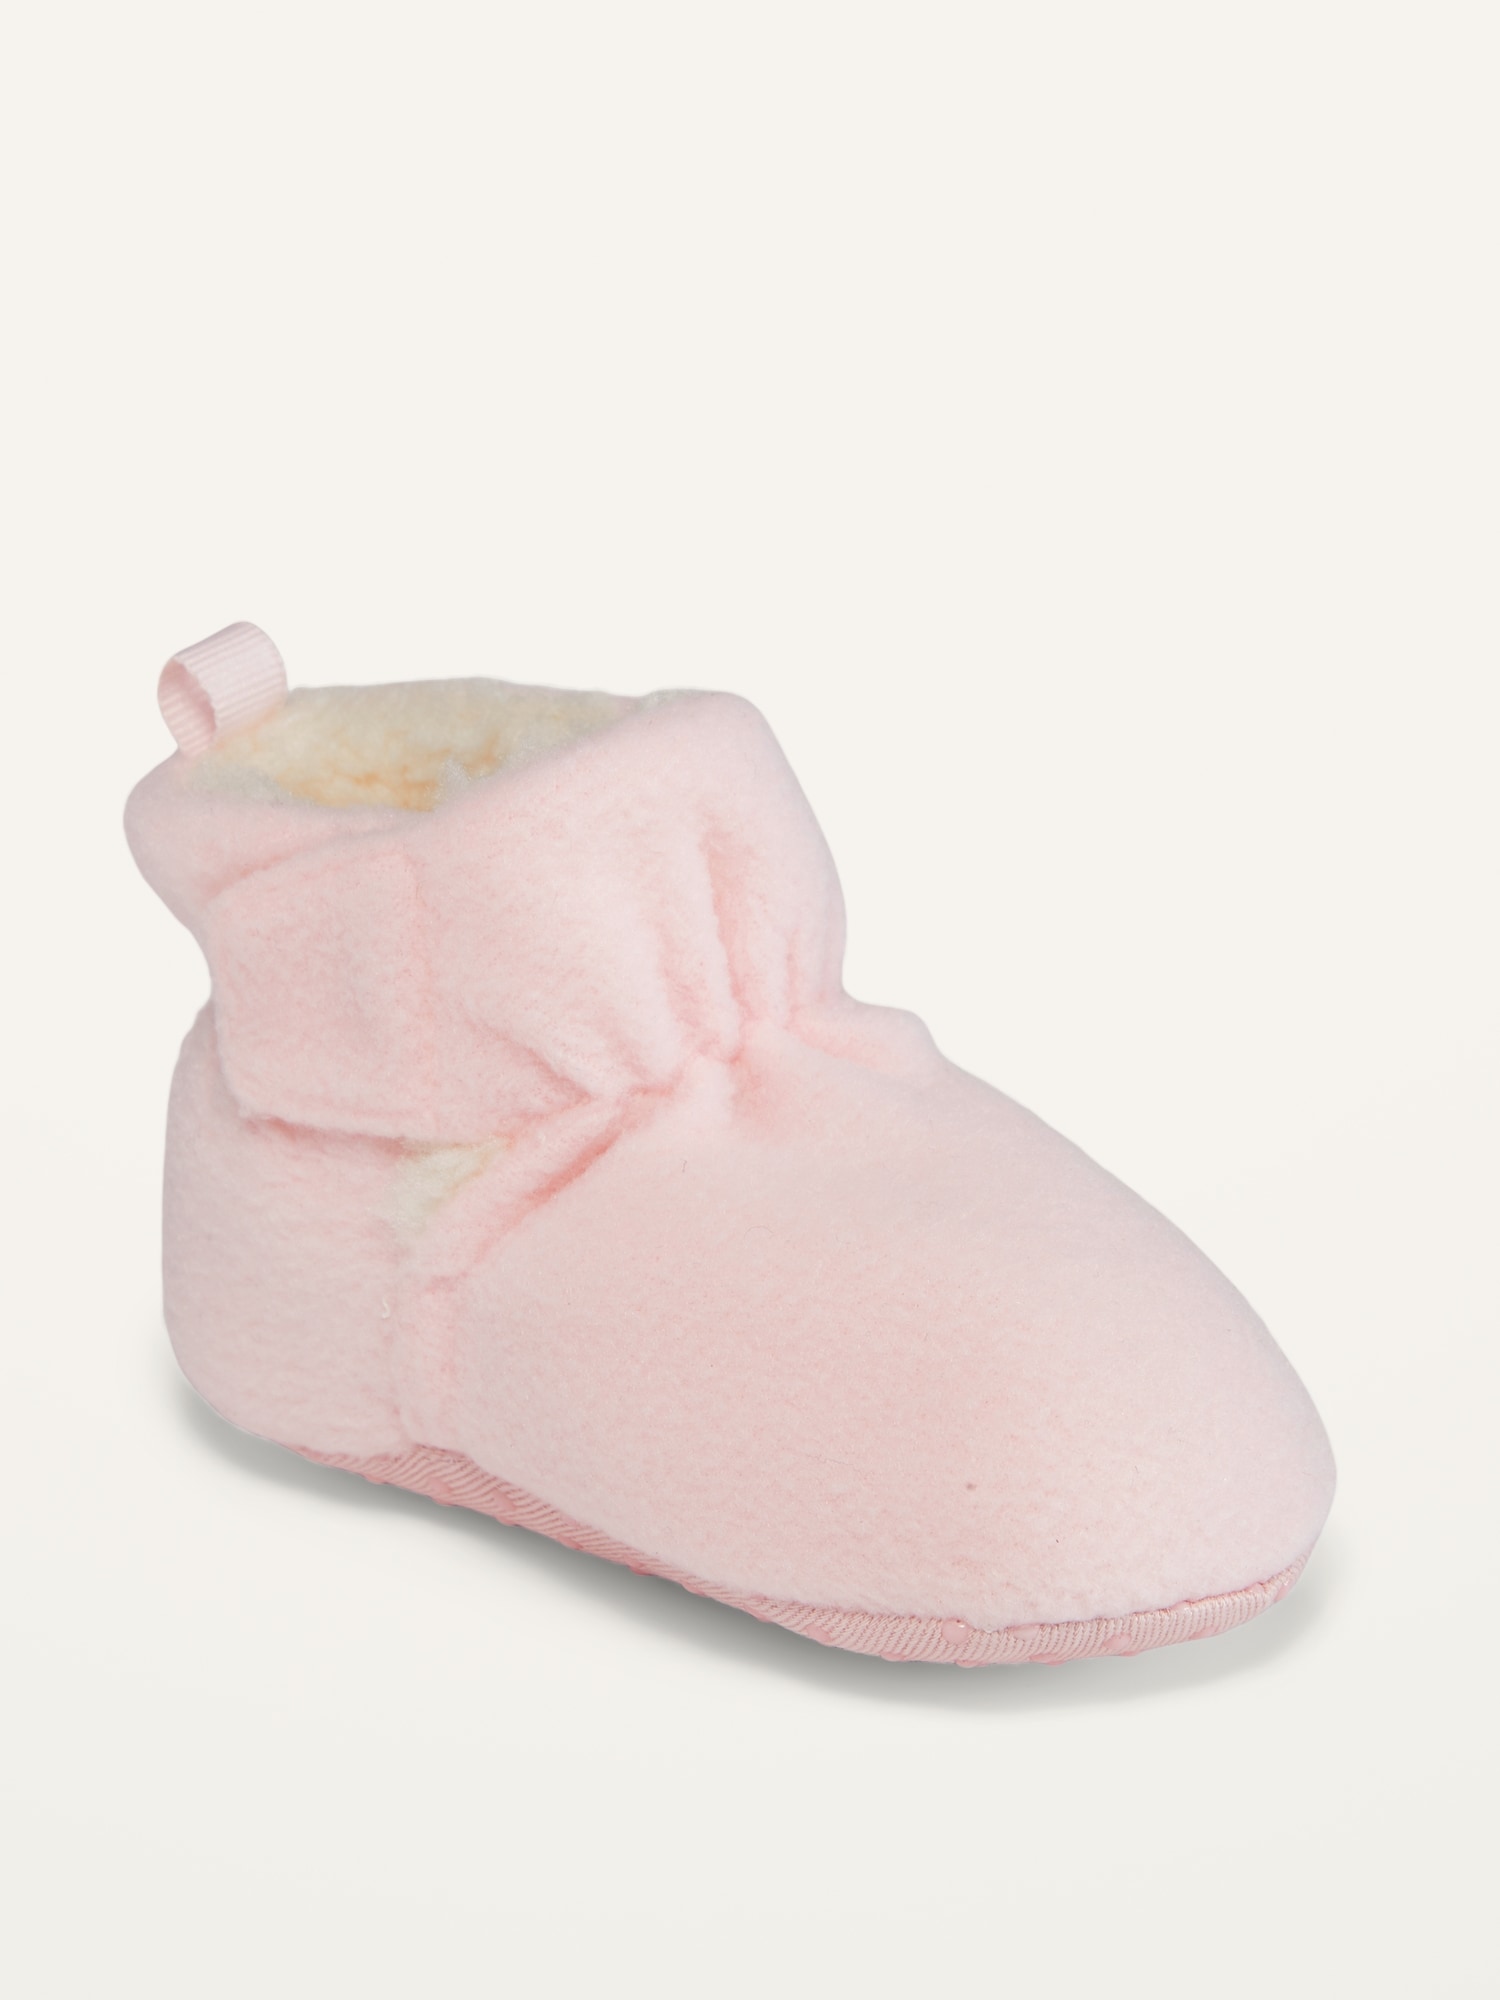 Unisex Micro Fleece Sherpa-Lined Booties for Baby